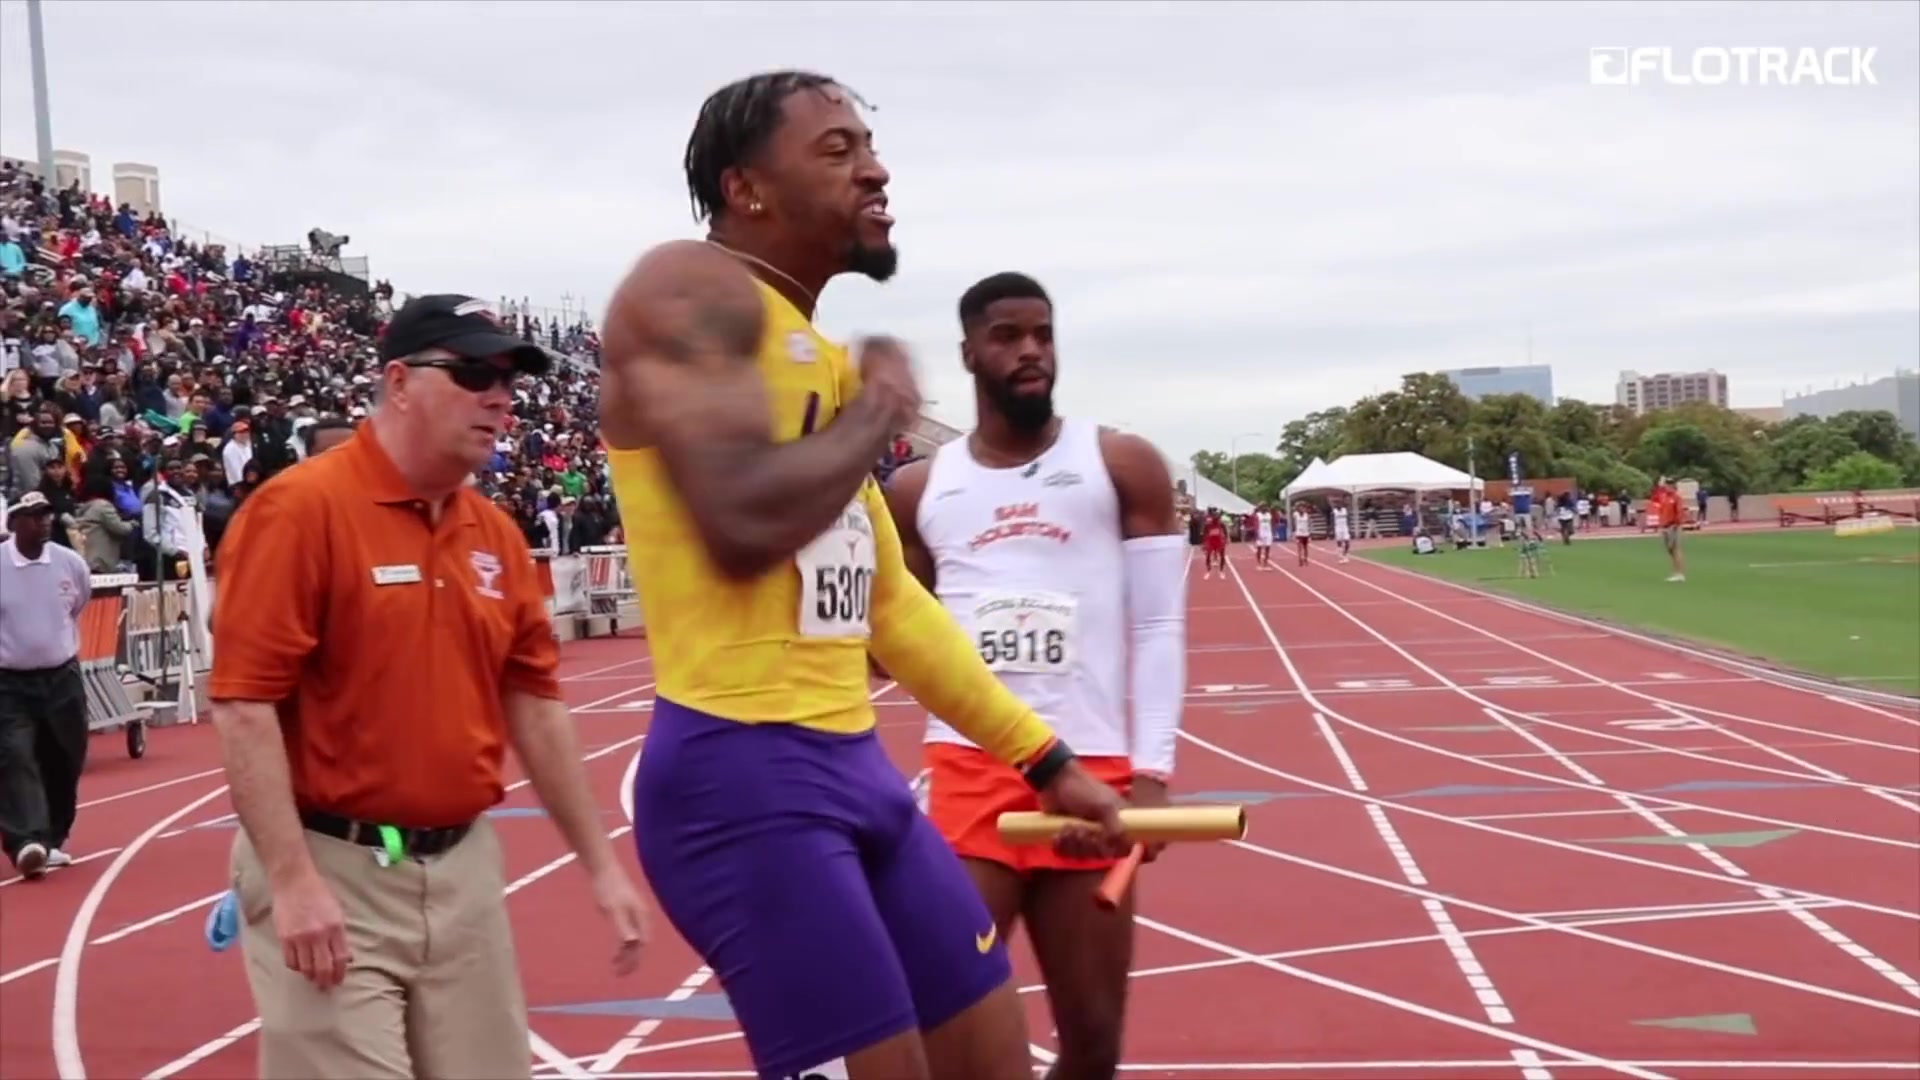 LSU And Houston Get Physical At Texas Relays-